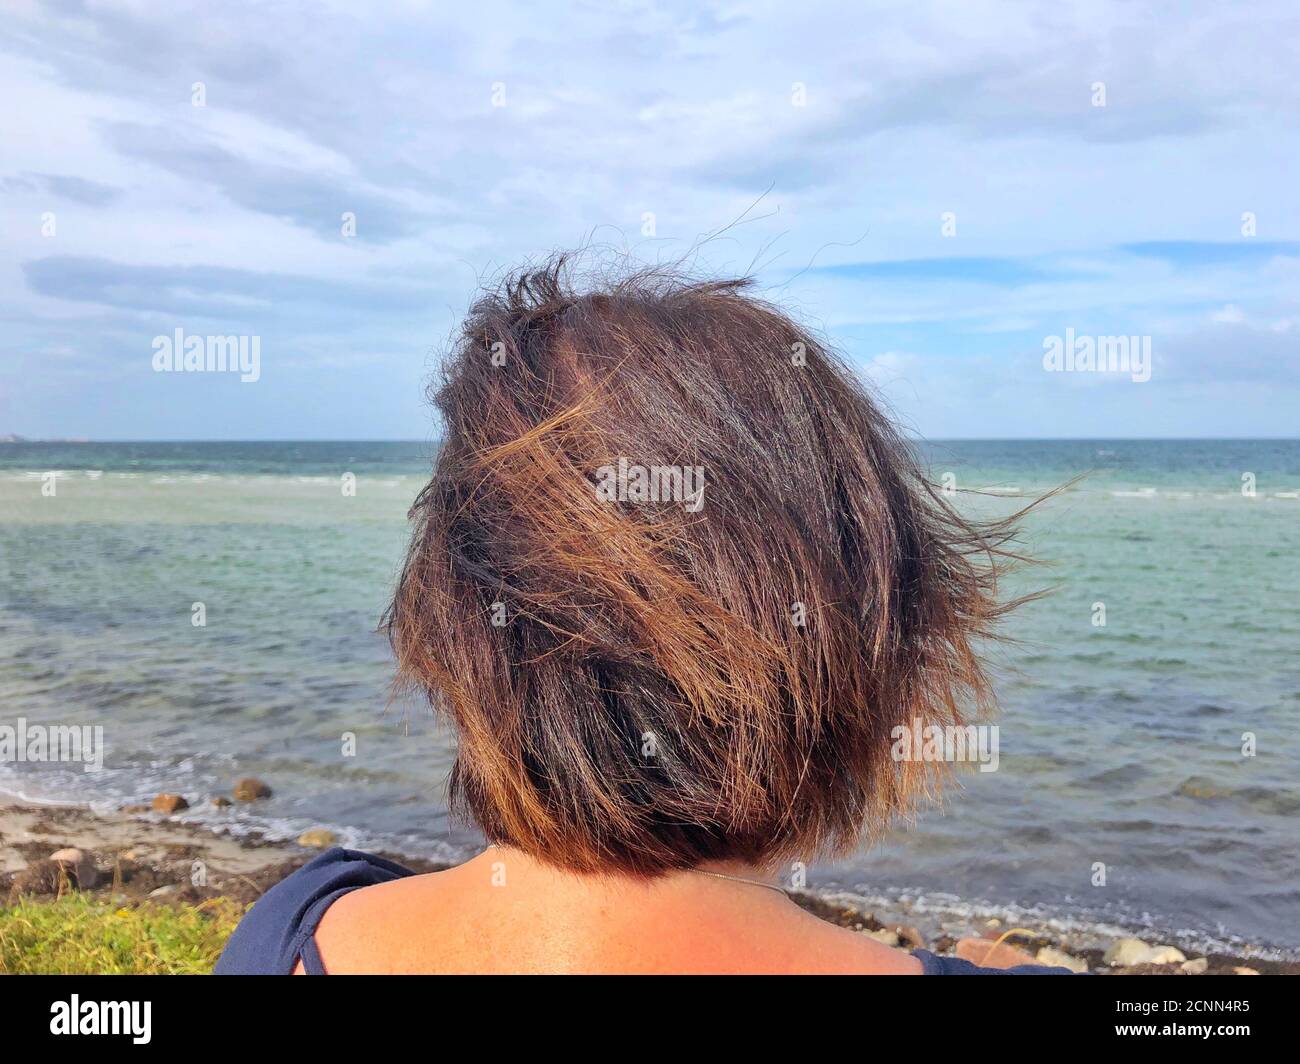 Rear view of a woman looking out to sea, Maarup Vig, Samsoe, Denmark Stock Photo